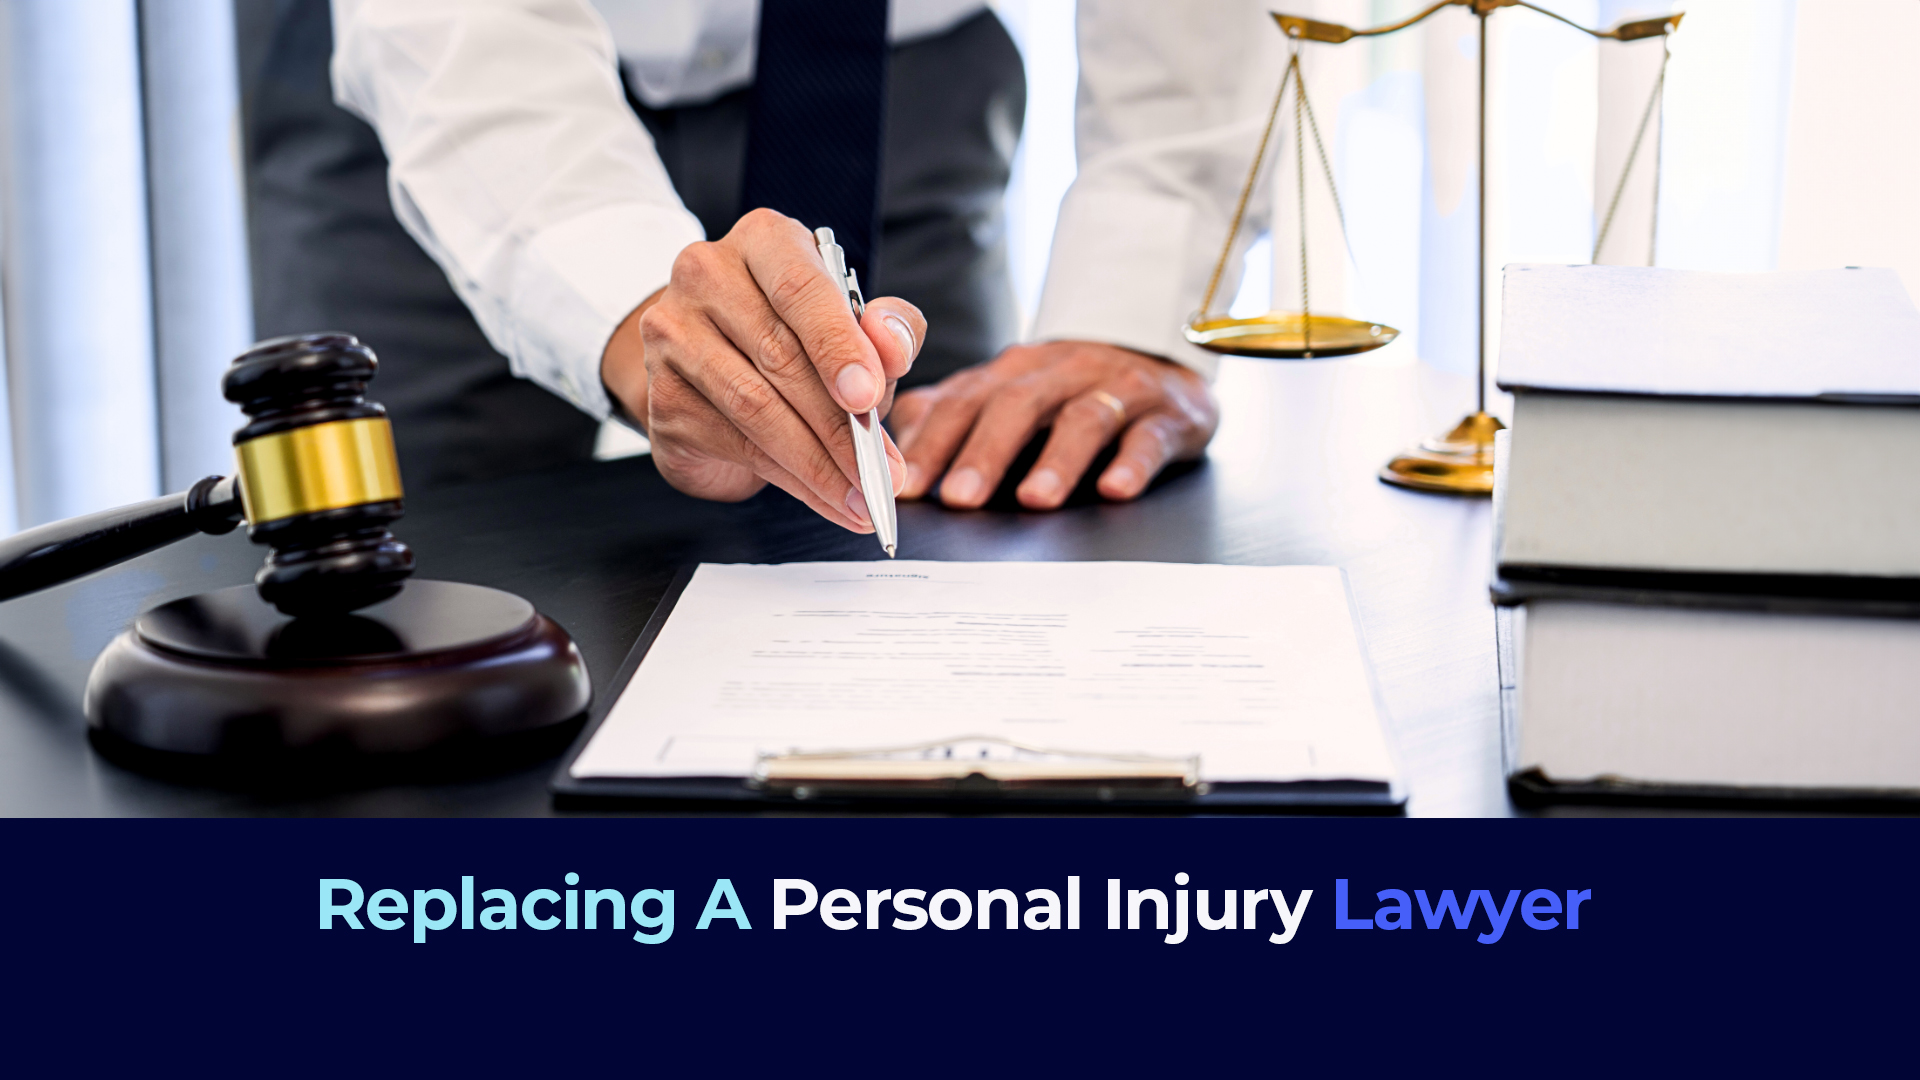 A picture of a man in formal cloth signing a document with the title "Replacing A Personal Injury Lawyer"